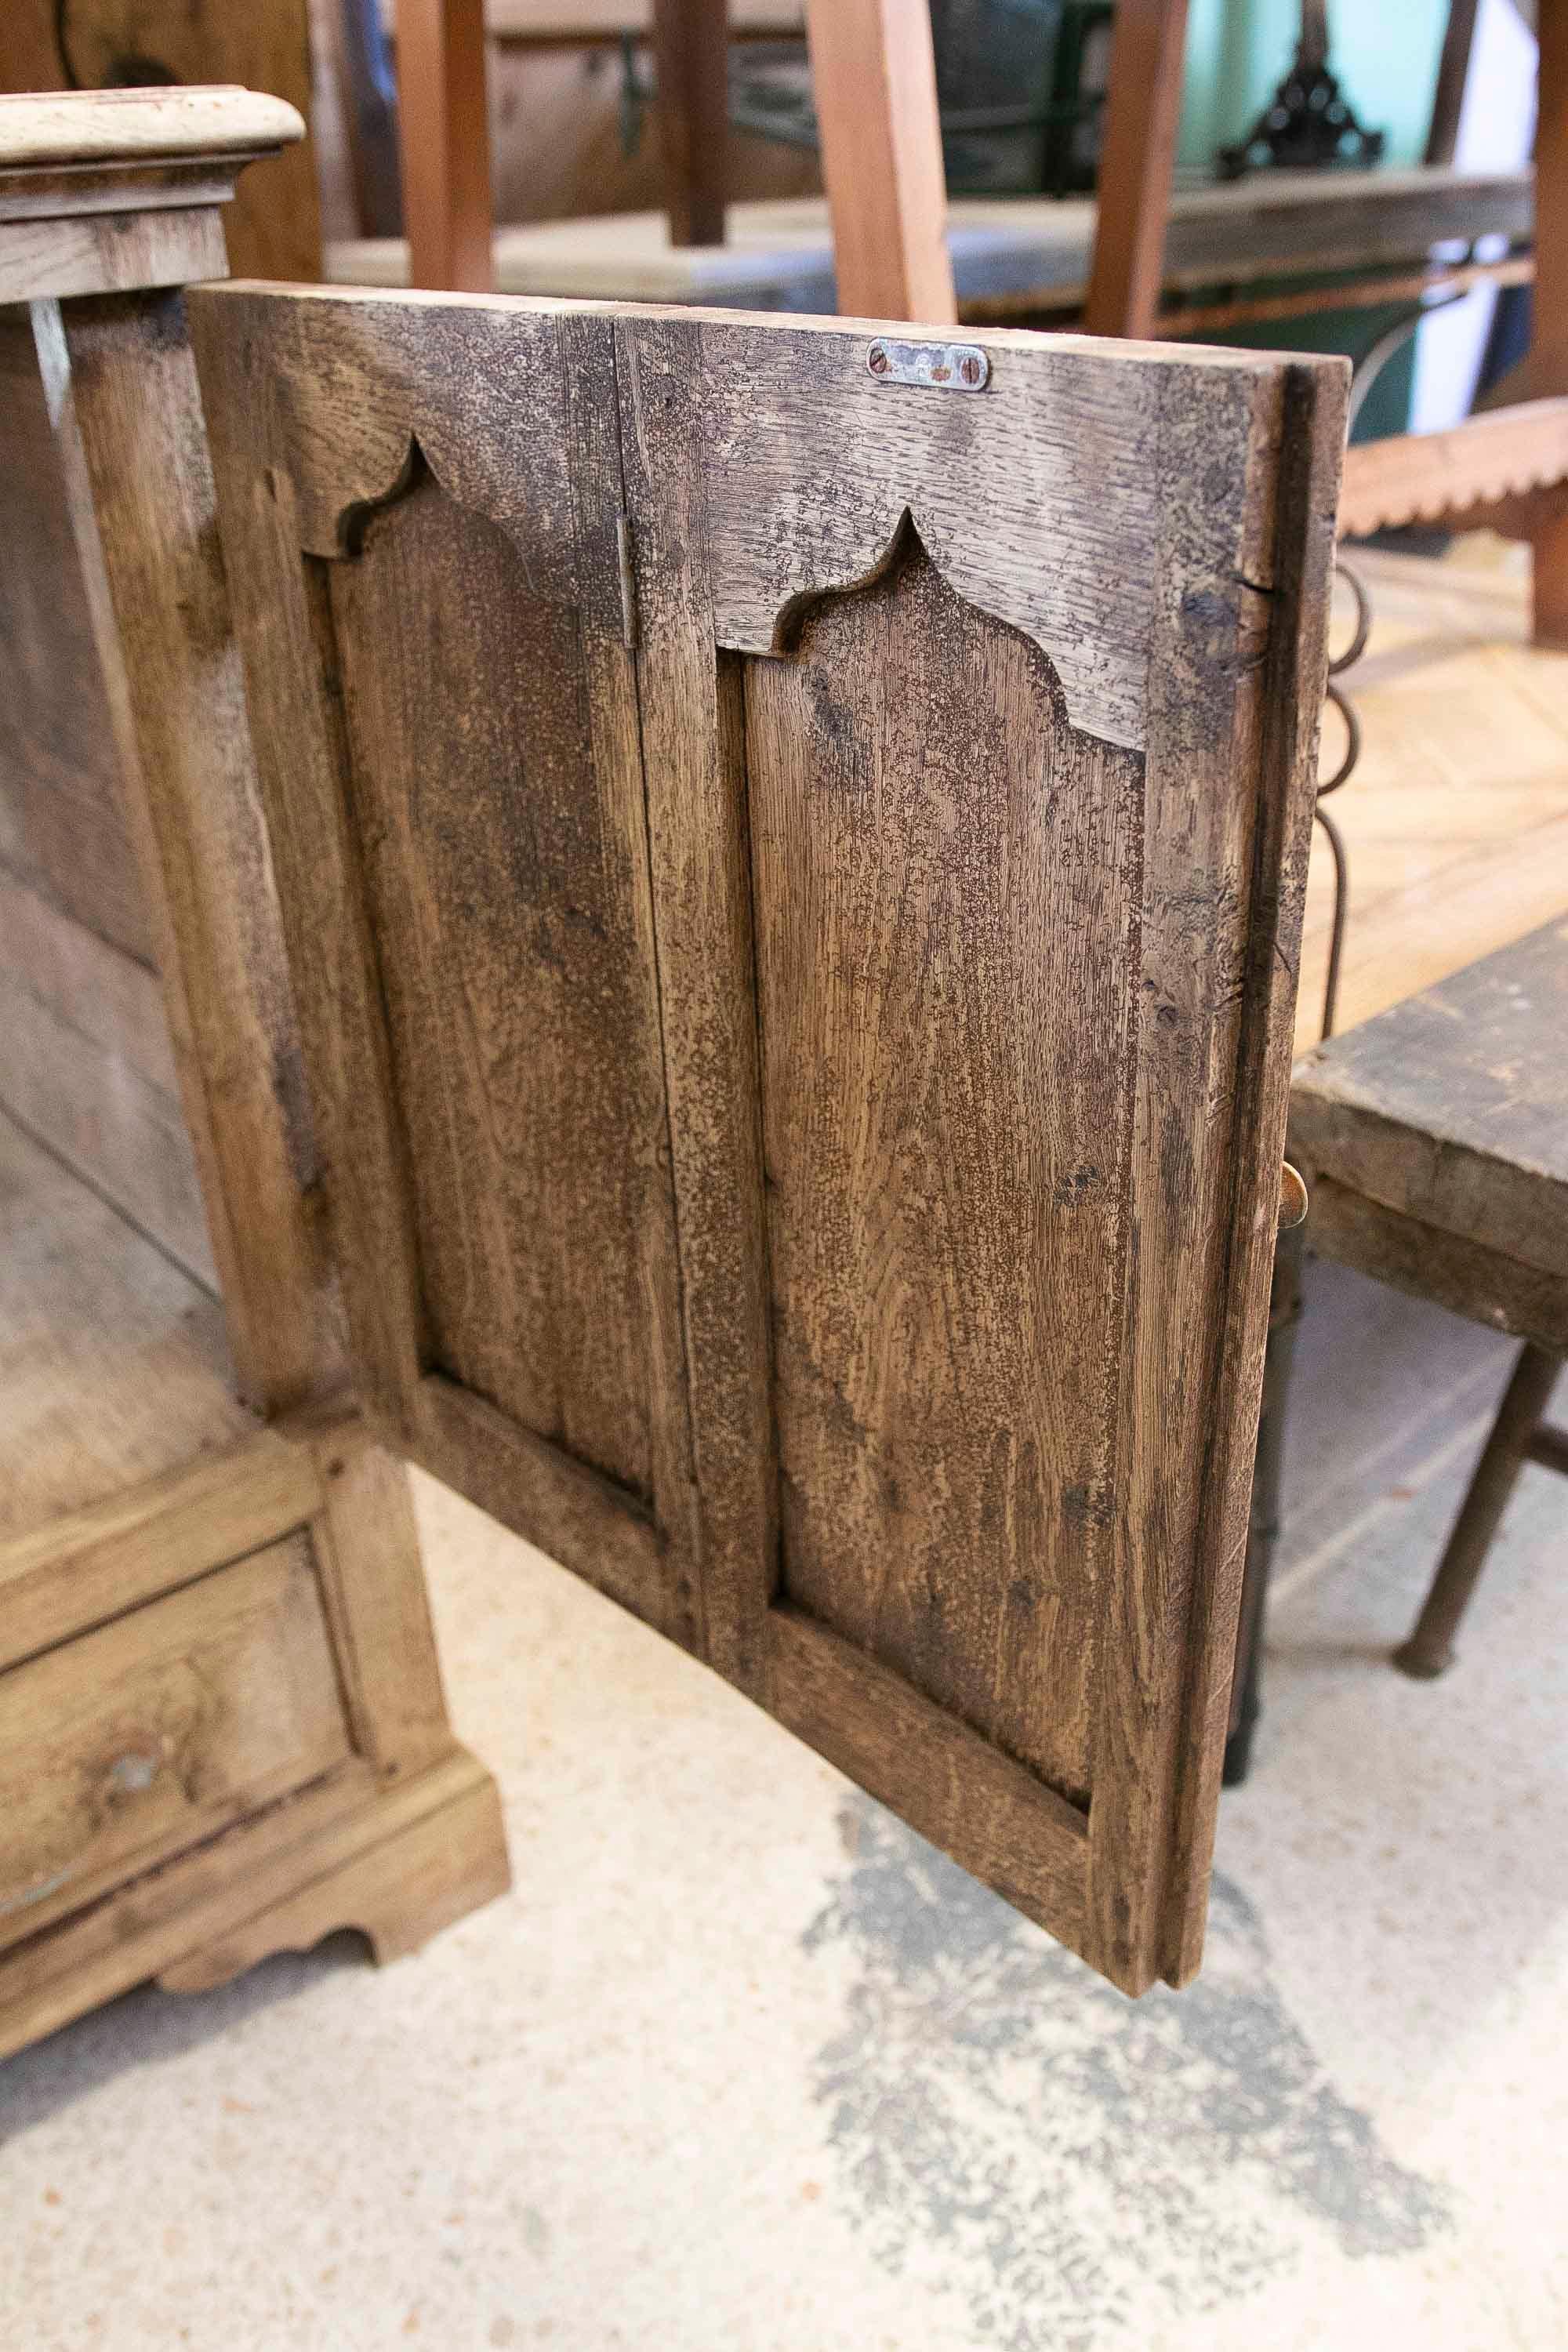 19th Century English Furniture with Doors and Drawer in the Tone of its Wood For Sale 5